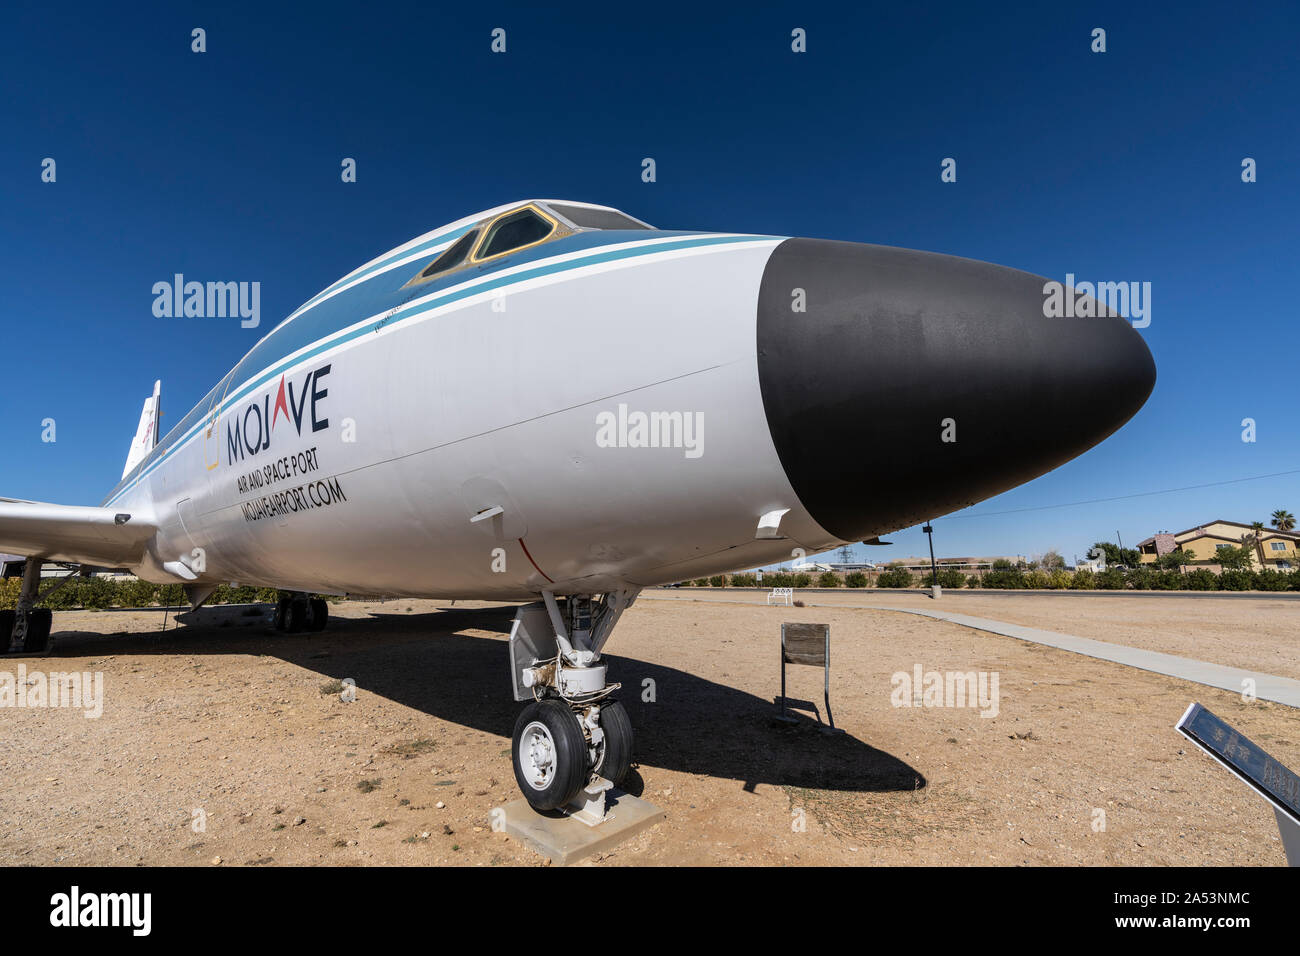 Mojave, California, USA - October 12, 2019:  Roadside NASA Convair jet on display along Highway 58 business route at Mojave Air and Space Port. Stock Photo